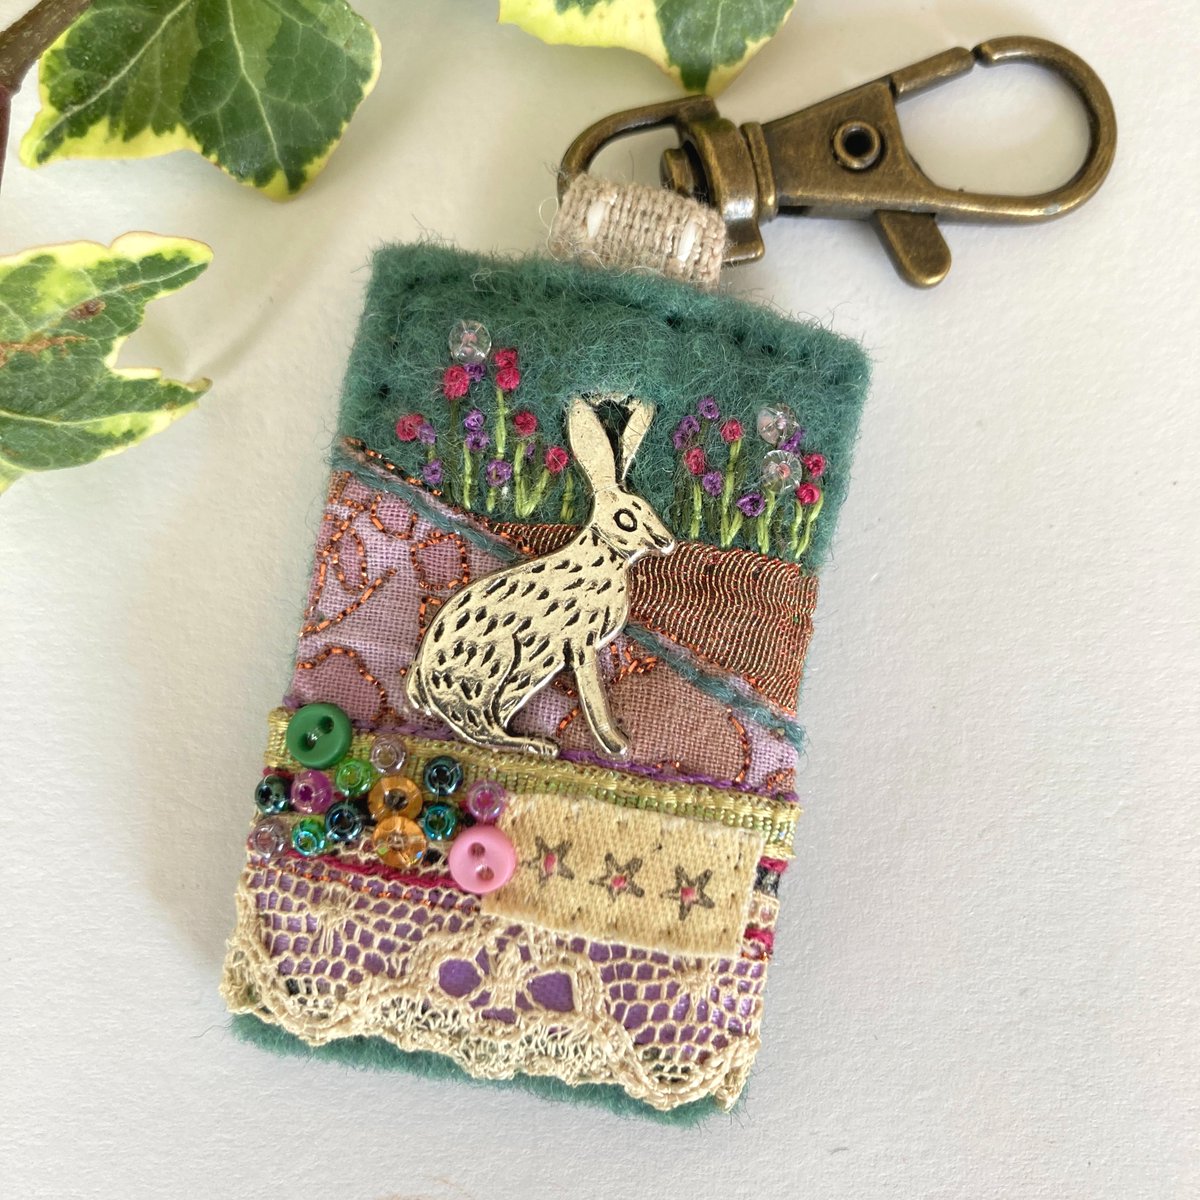 This hand sewn clip accessory has been inspired by the many hares I regularly see darting through the Lincolnshire Fens. Decorated with pretty trims and tiny embellishments, it's ideal for attaching to bags and keys. elliestreasures.square.site/product/hare-c… #EarlyBiz #shopindie #mhhsbd #nature